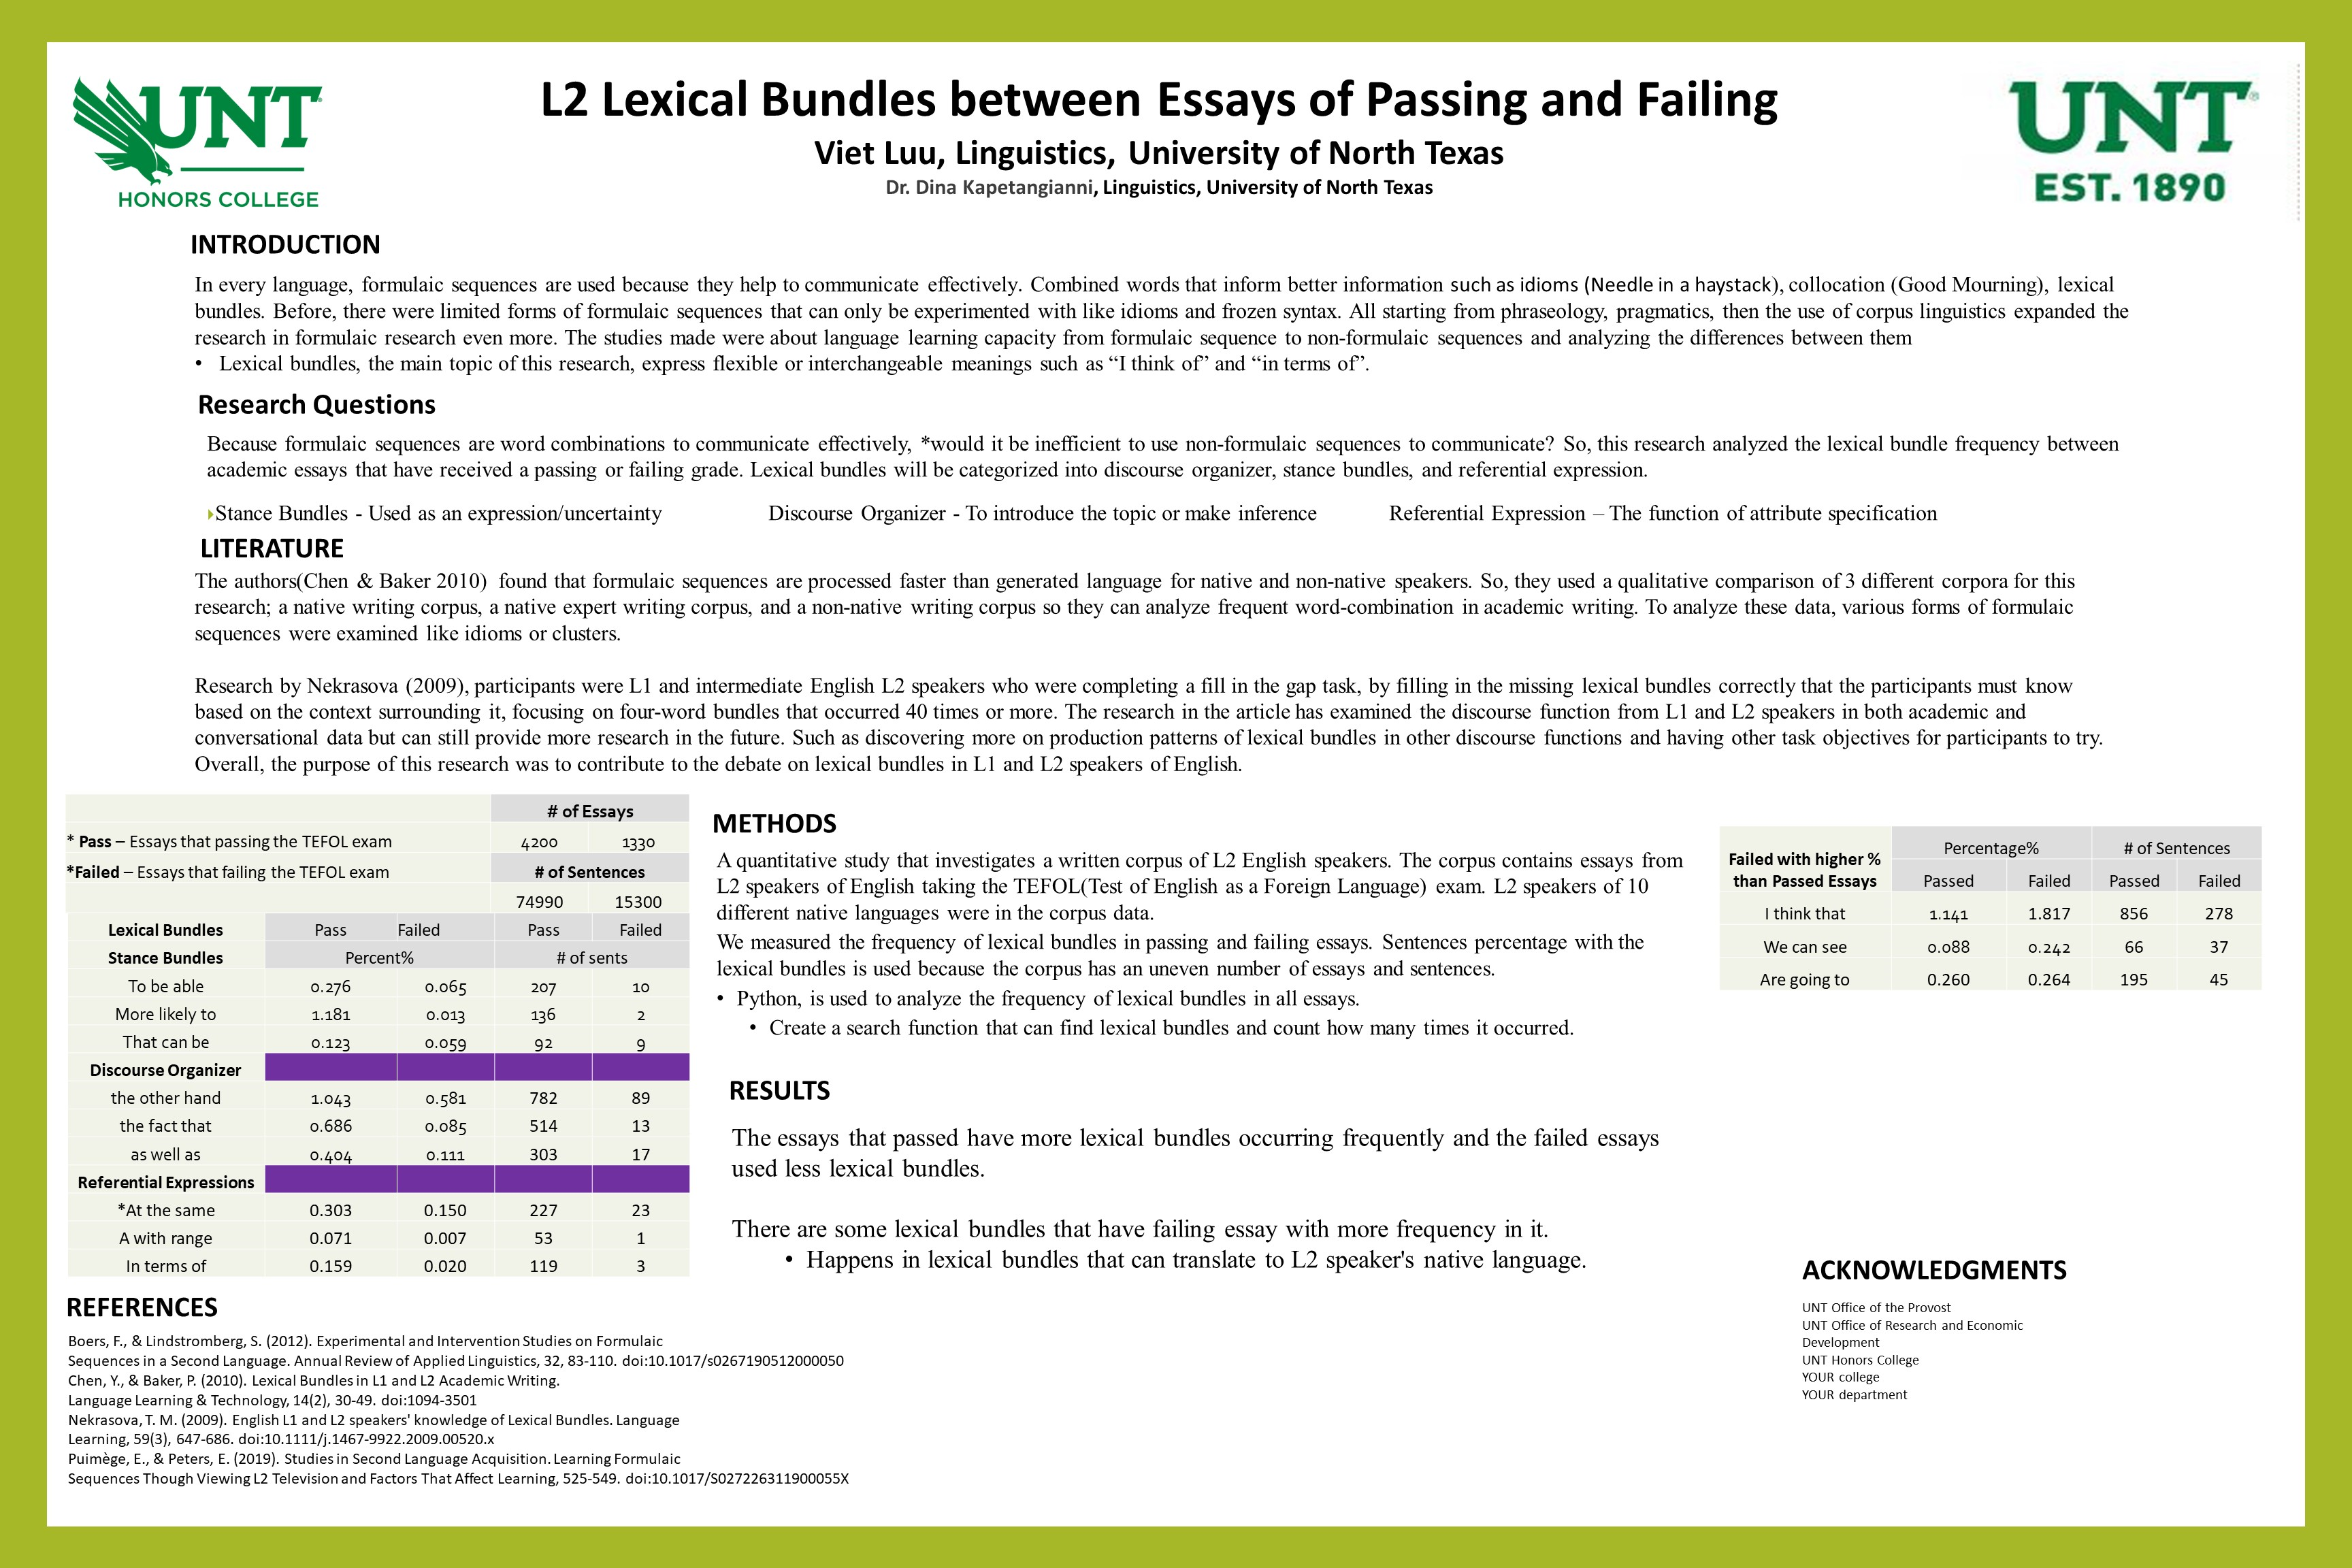 L2 Lexical Bundles between Essays of Passing and Failing